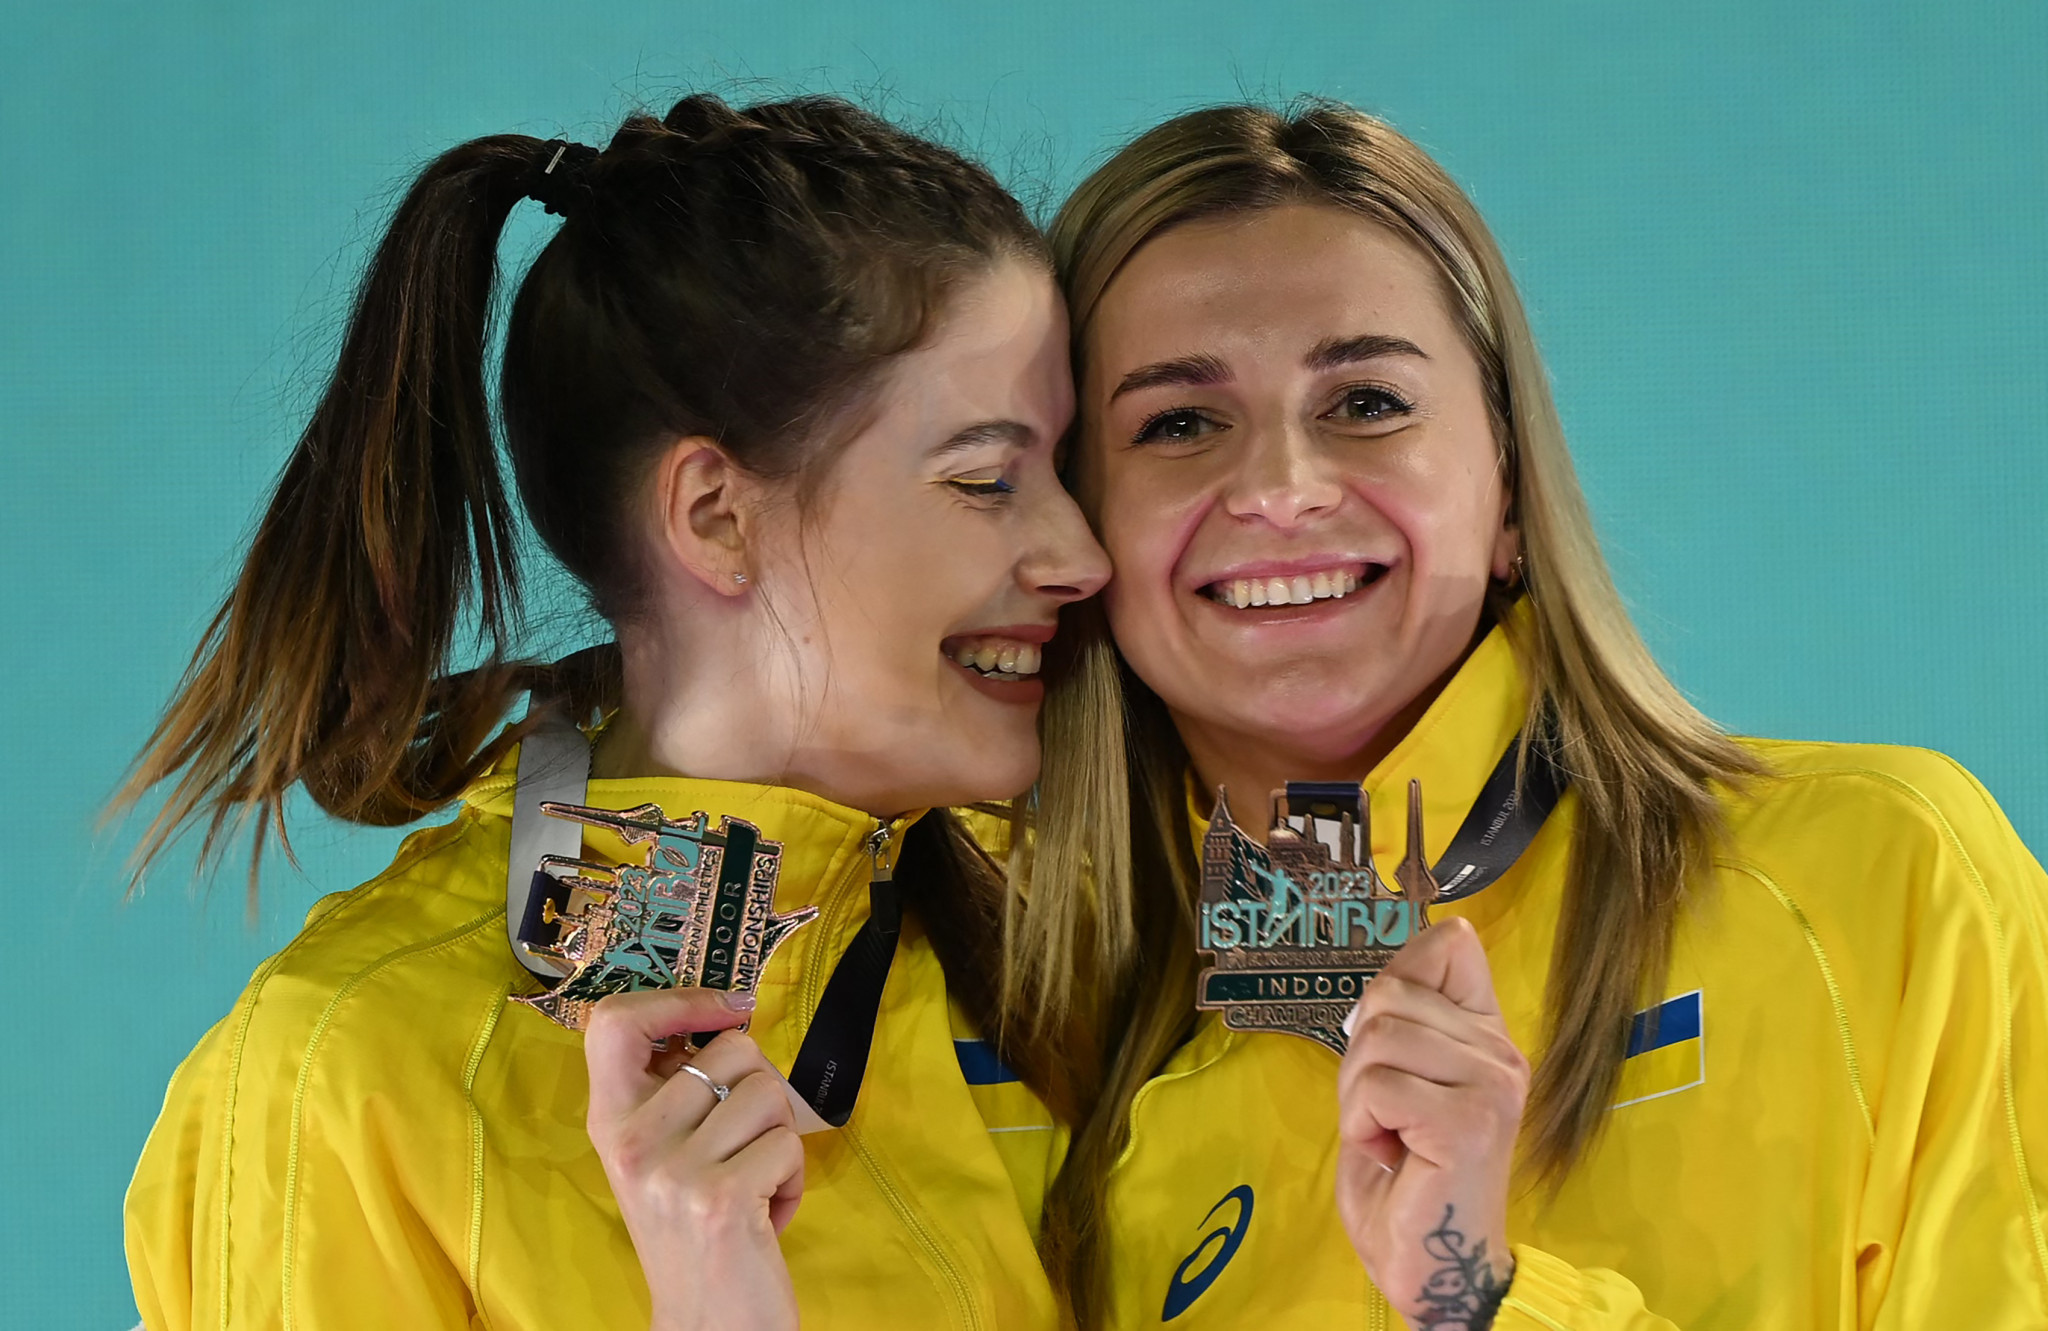 Ukraine's athletes, including Yaroslava Mahuchikh and Kateryna Tabashnyk, gold and bronze medallists in the high jump at this month's European Athletics Indoor Championships, have continued to keep their country's flag flying at international events ©Getty Images